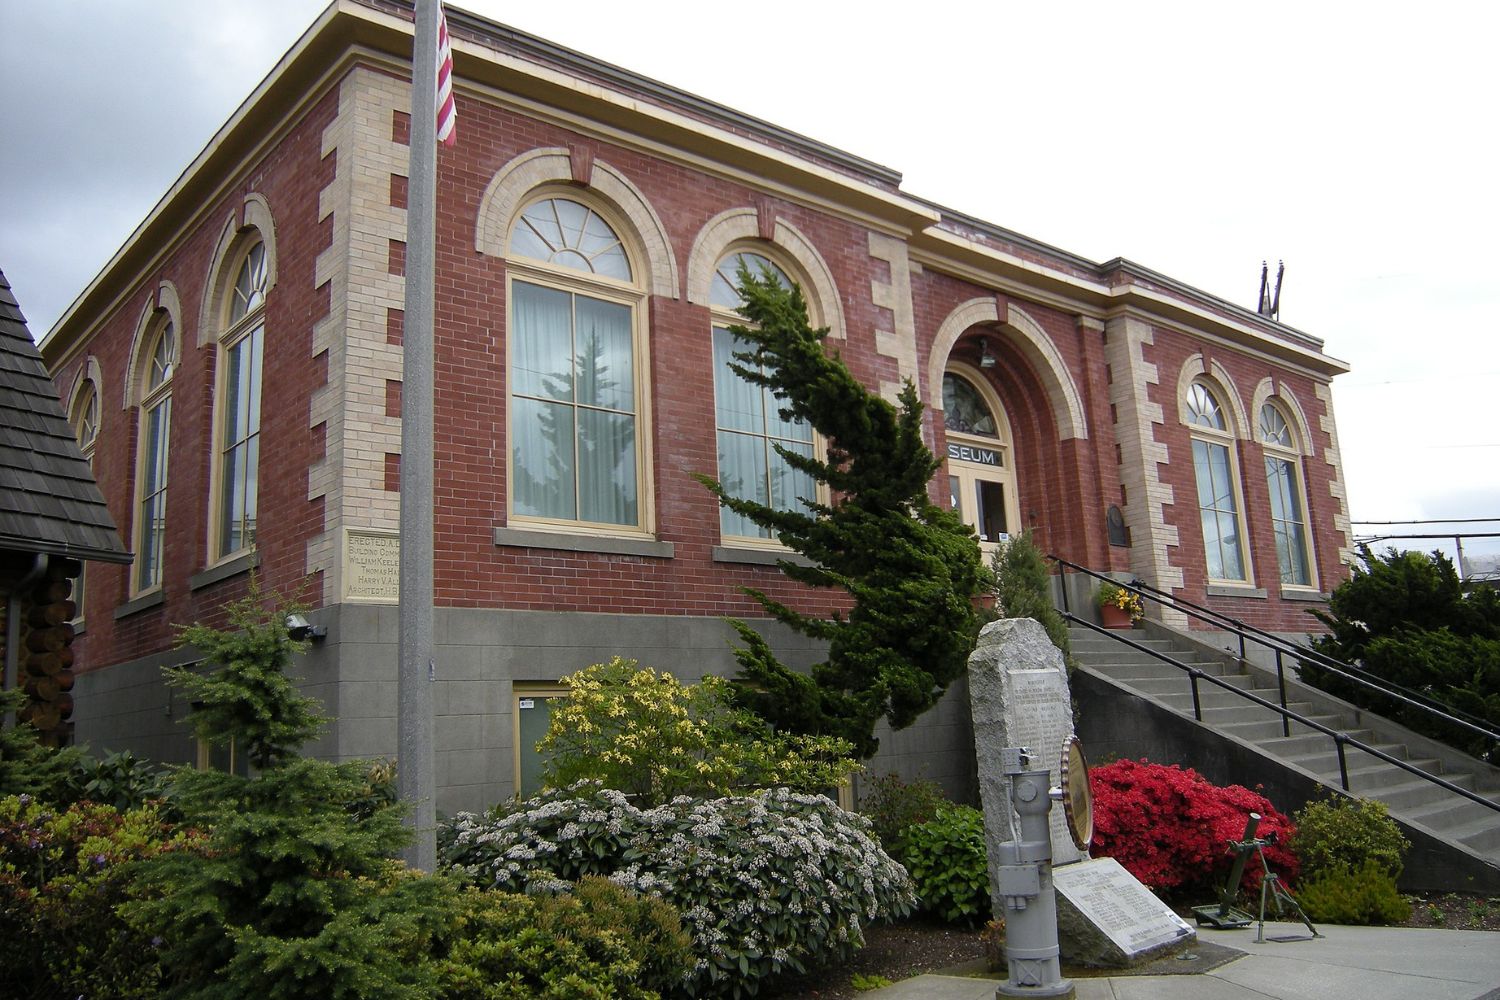 Edmonds Historical Museum, Joe Mabel, CC BY-SA 3.0 <http://creativecommons.org/licenses/by-sa/3.0/>, via Wikimedia Commons